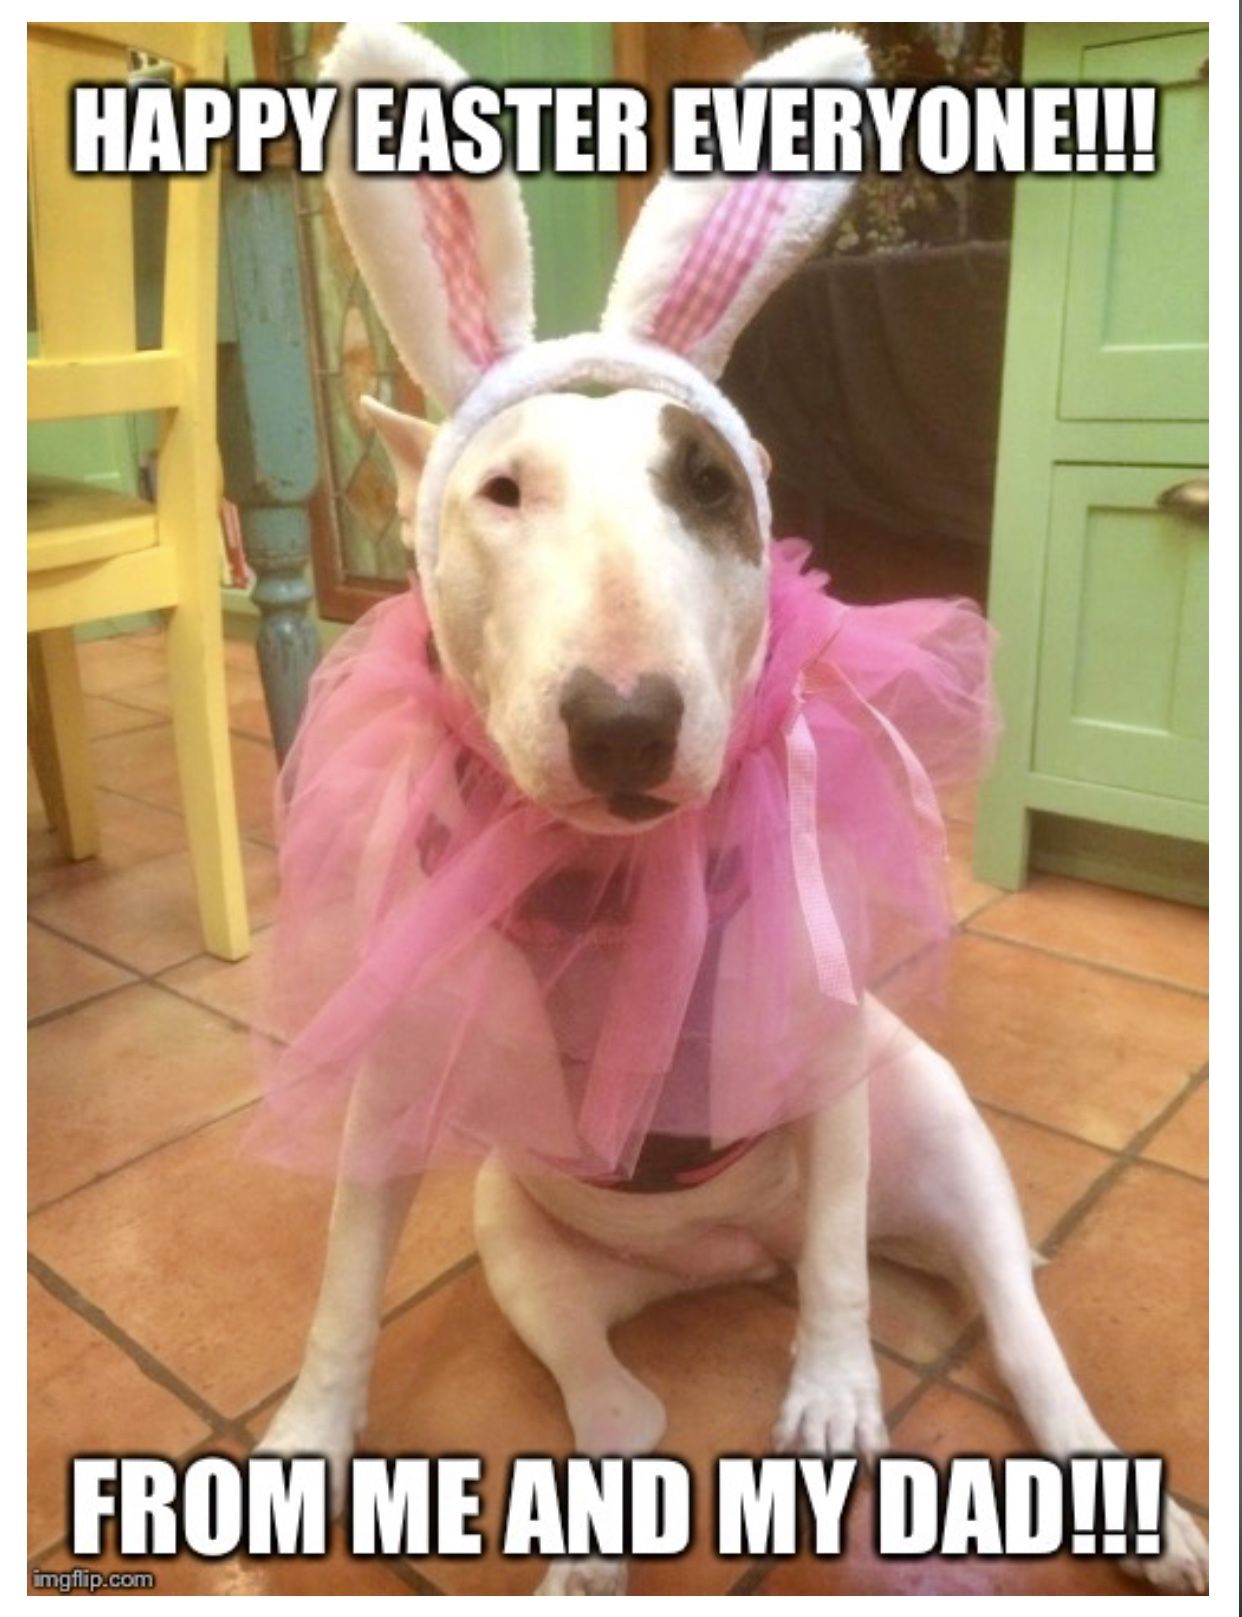 Bull Terrier sitting on the floor wearing a rabbit ears headband and a pink tutu on its neck and a text 